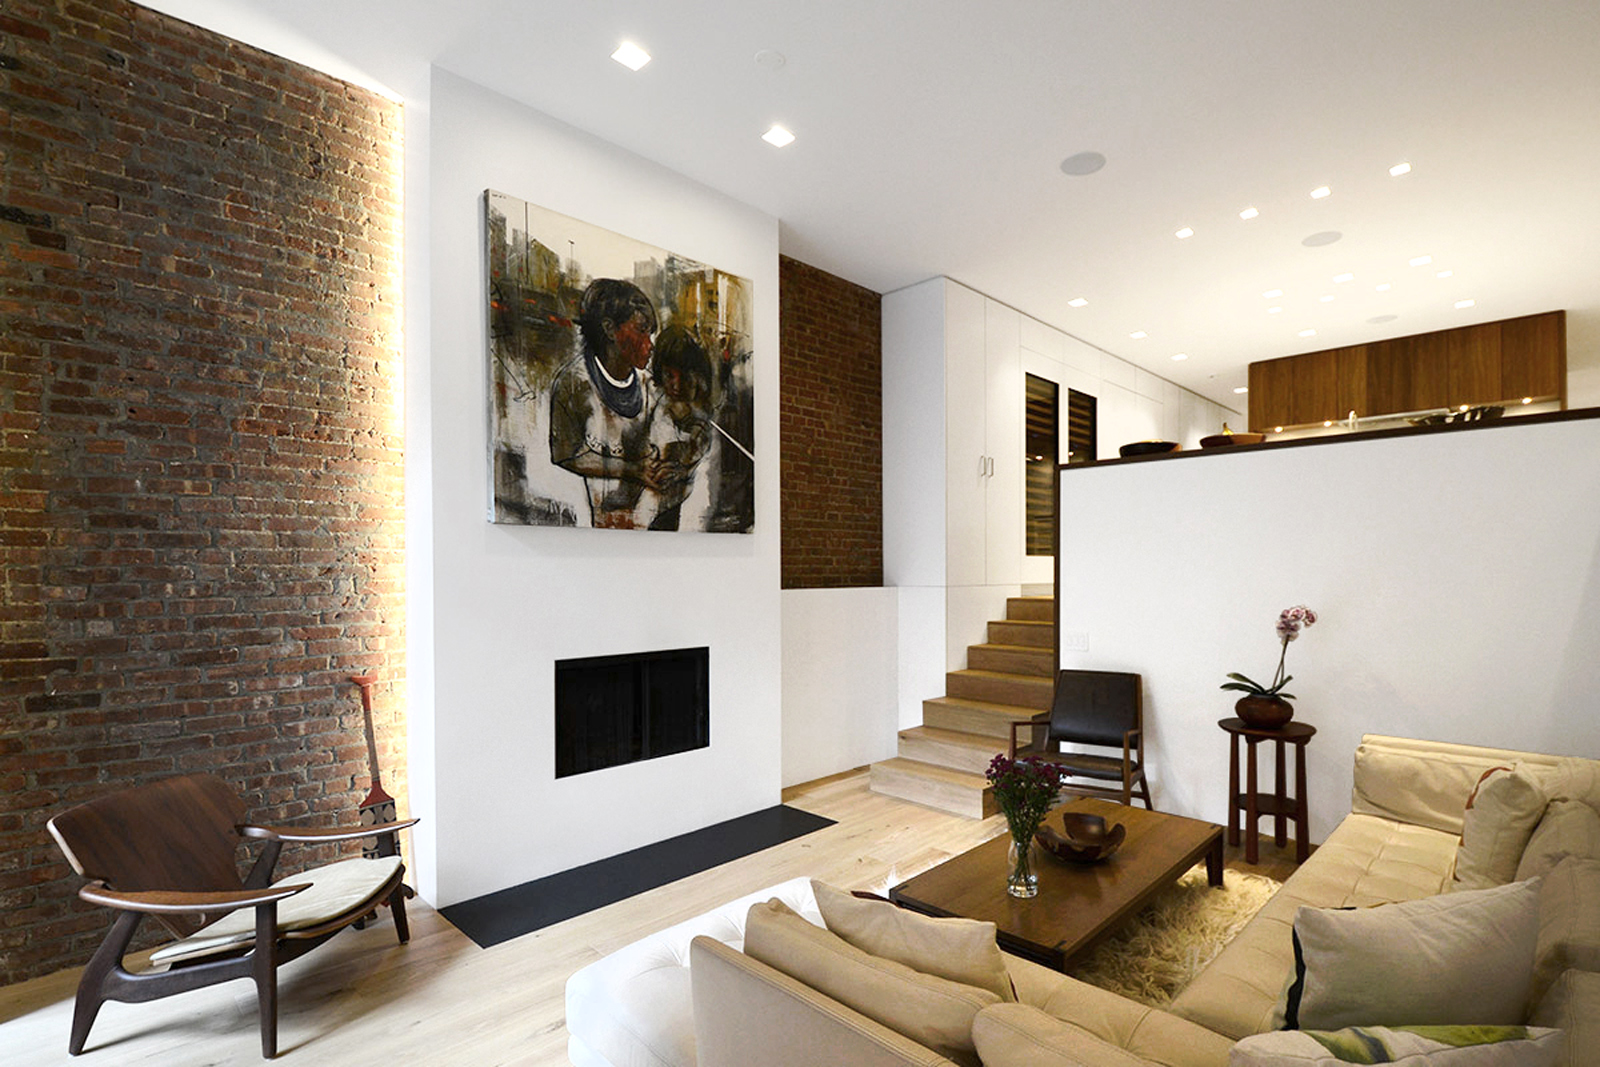 res4-resoltuion-4-architecture-modern-residential-brownstone-upper-west-side-townhouse-renovation-living-room-01.jpg